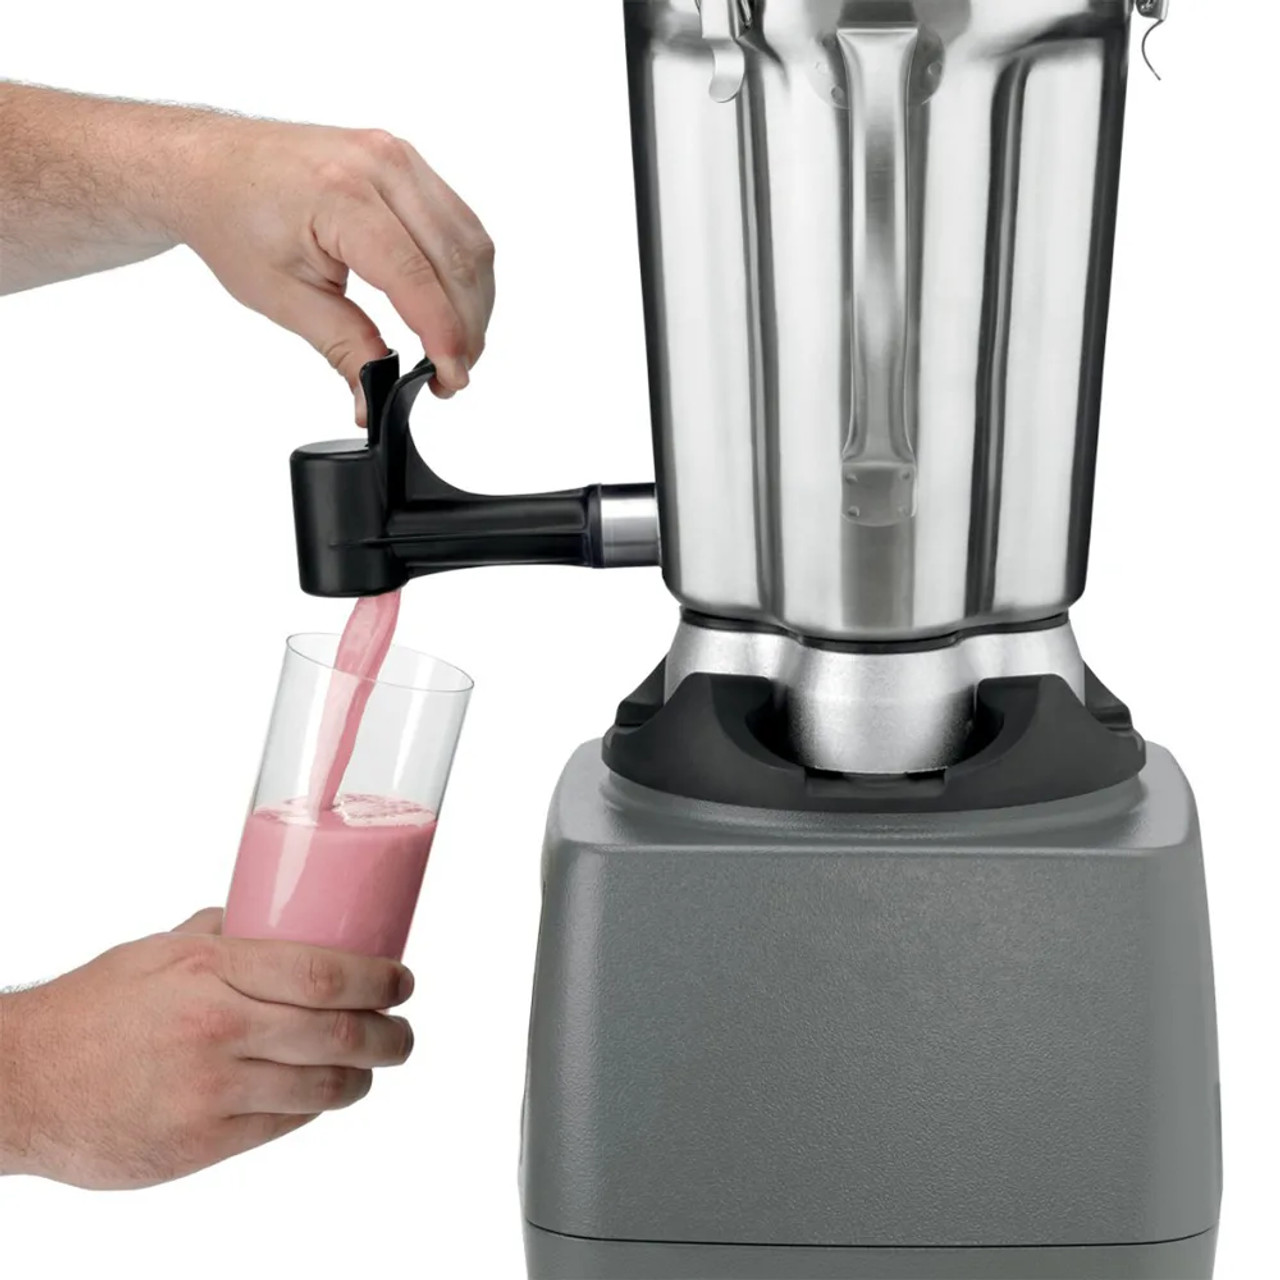 Waring Countertop Food Blender: Efficient Mixing for Commercial Kitchens - Chicken Pieces